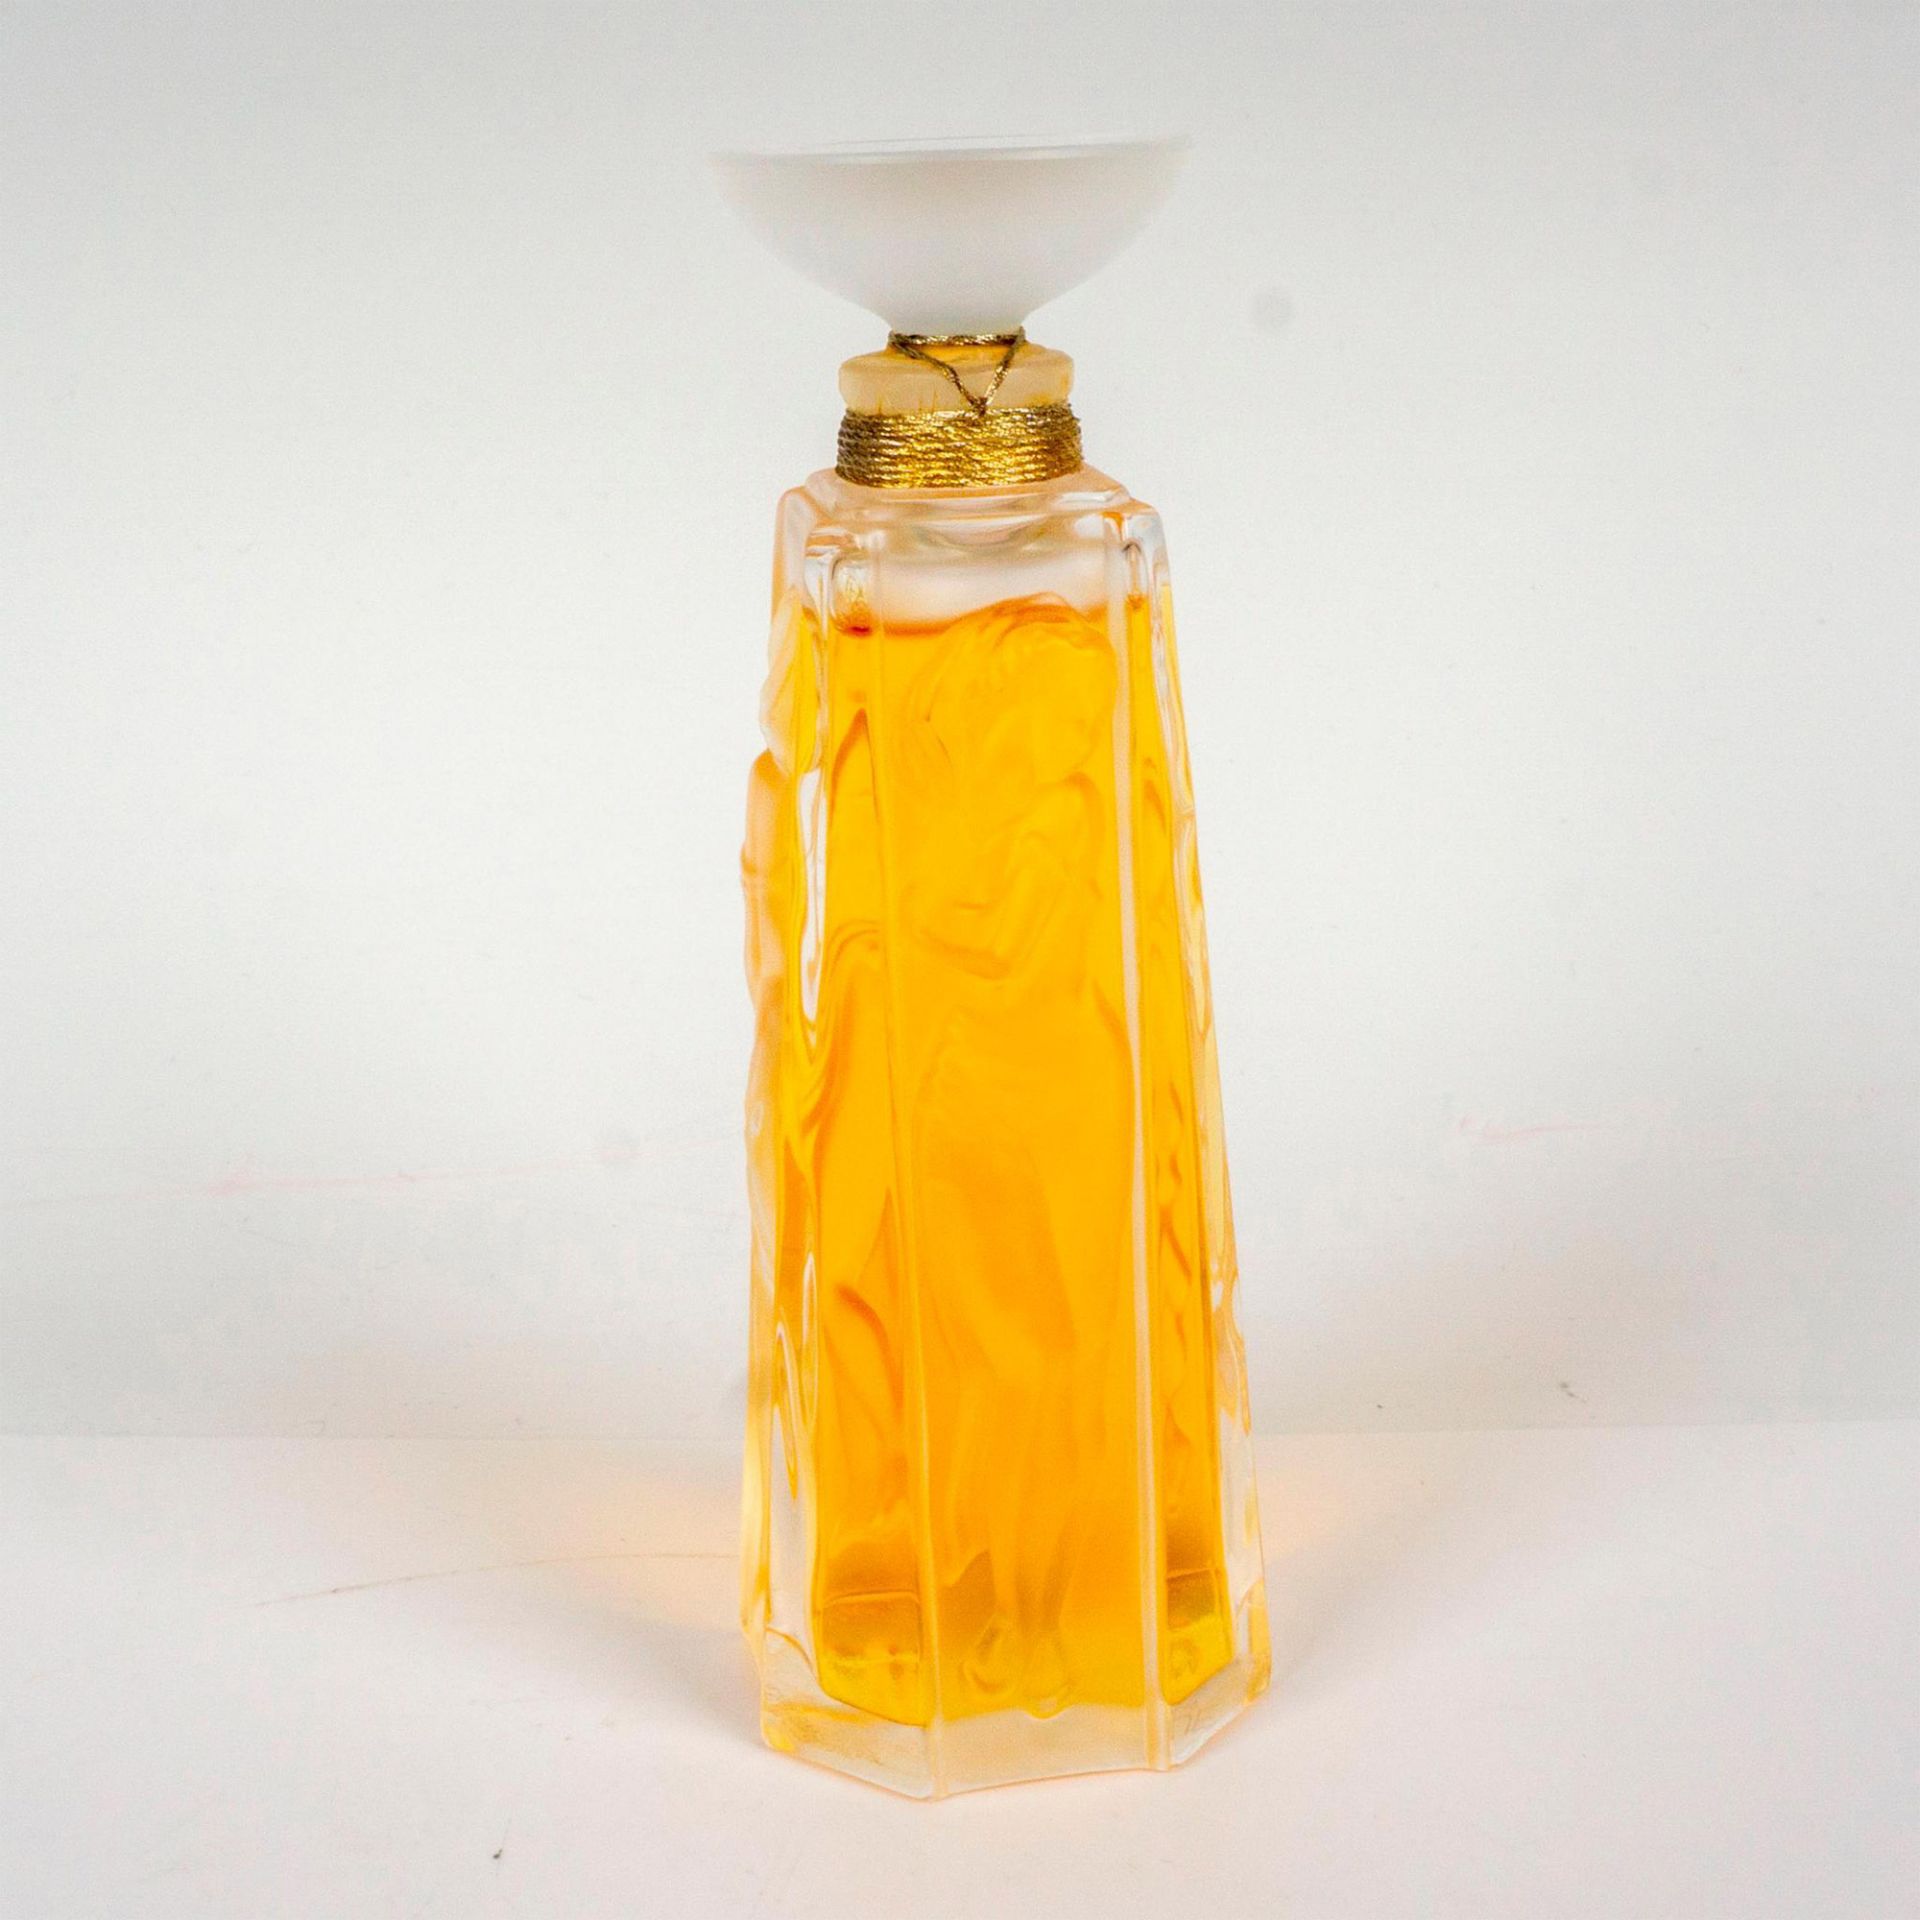 Lalique Crystal Perfume Bottle, Les Muses - Image 2 of 3